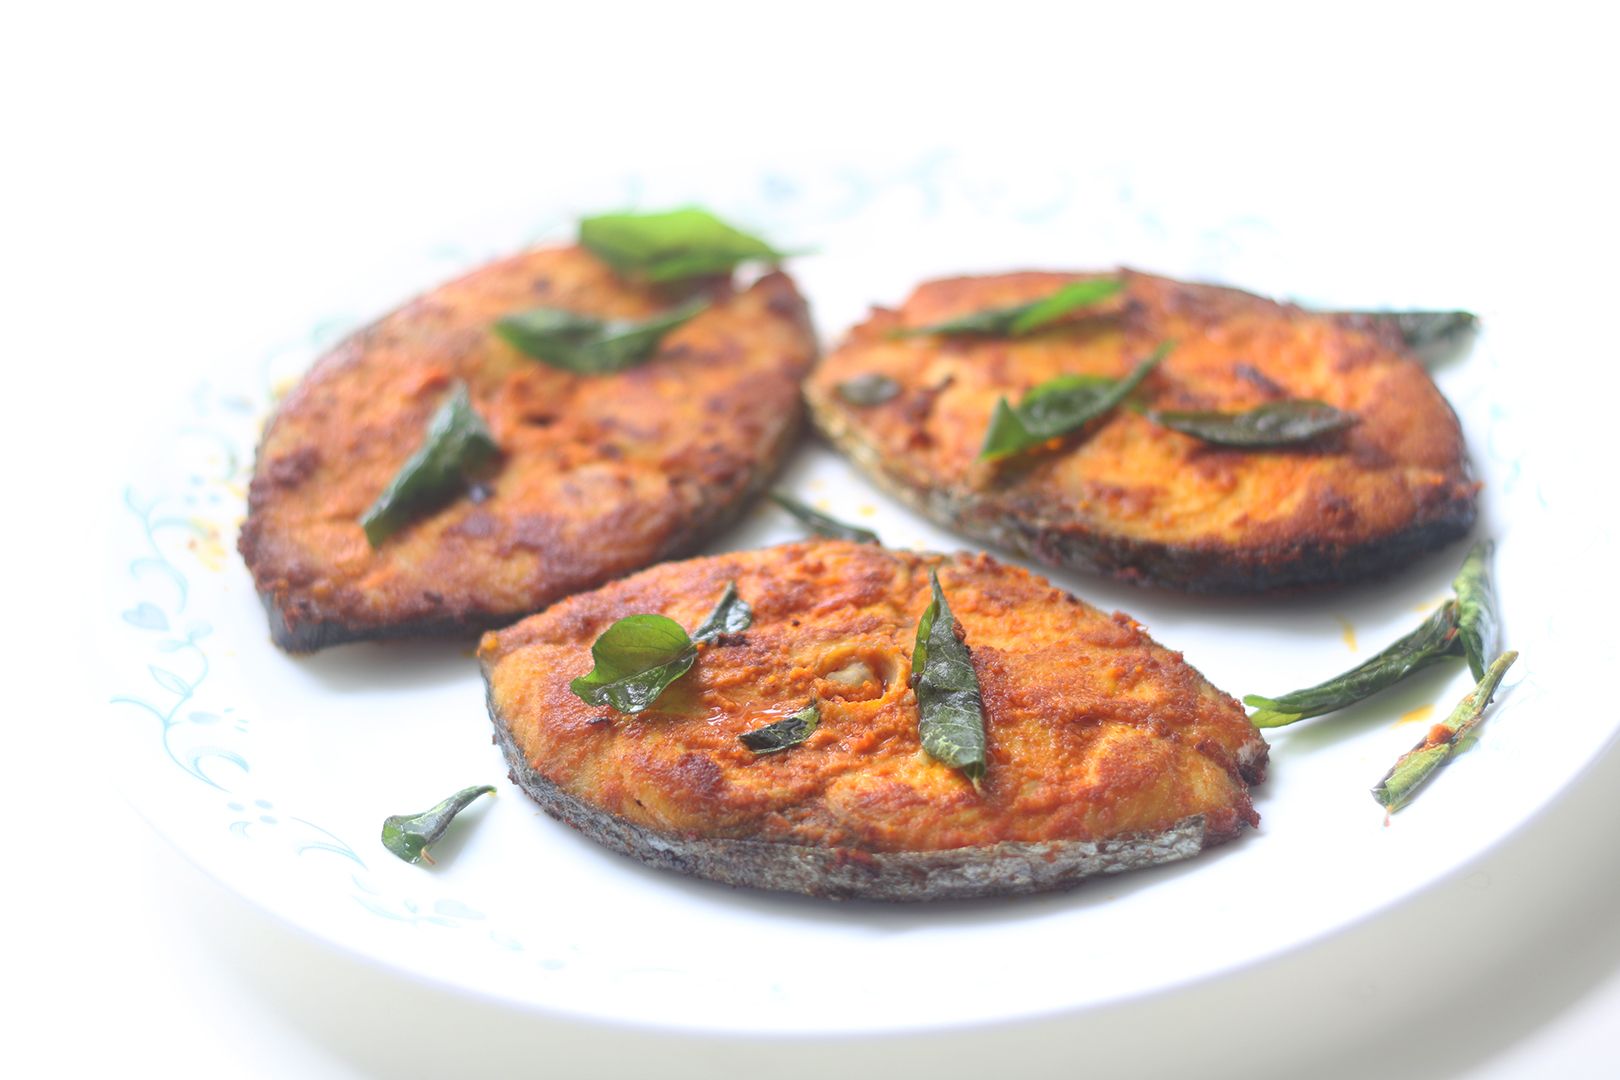 Pan Fried King Fish Steak Recipe - Healthy Fish Fry - The Indian